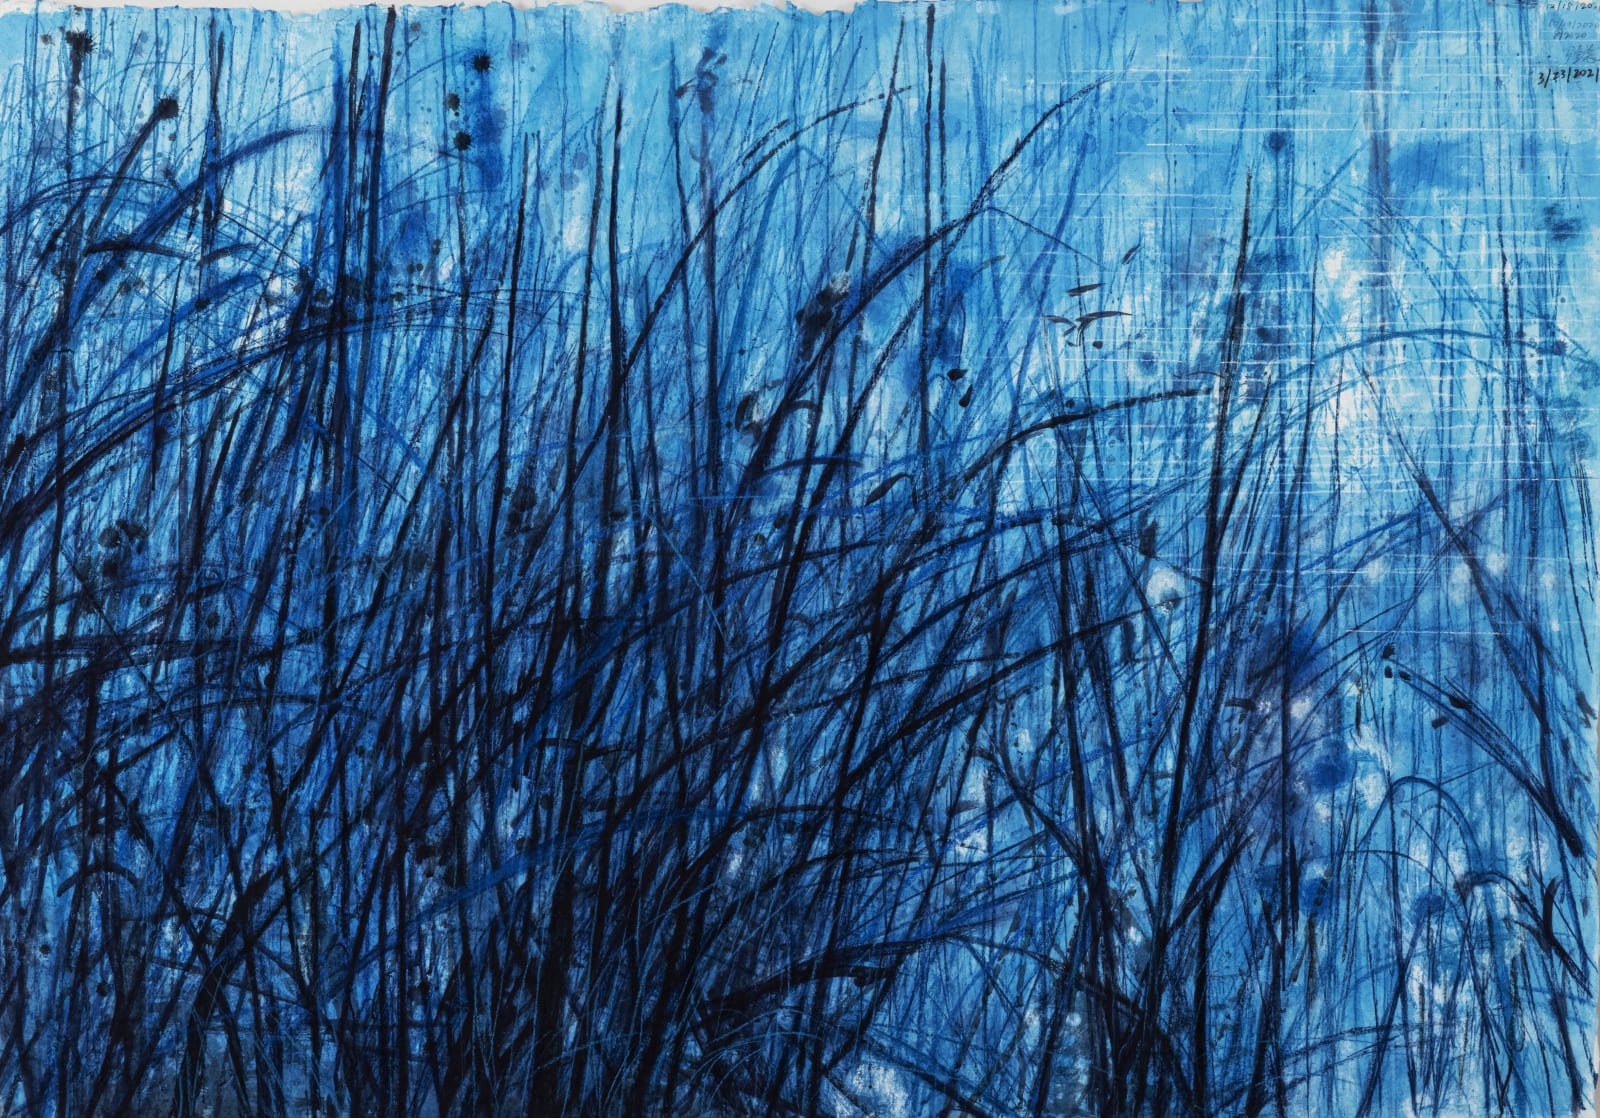 Leaves of Grass No. 18 Ancient Ink, Watercolor and Pastel on Suzhou Pi Xuan Paper 148 x 212 cm, 2020-2021